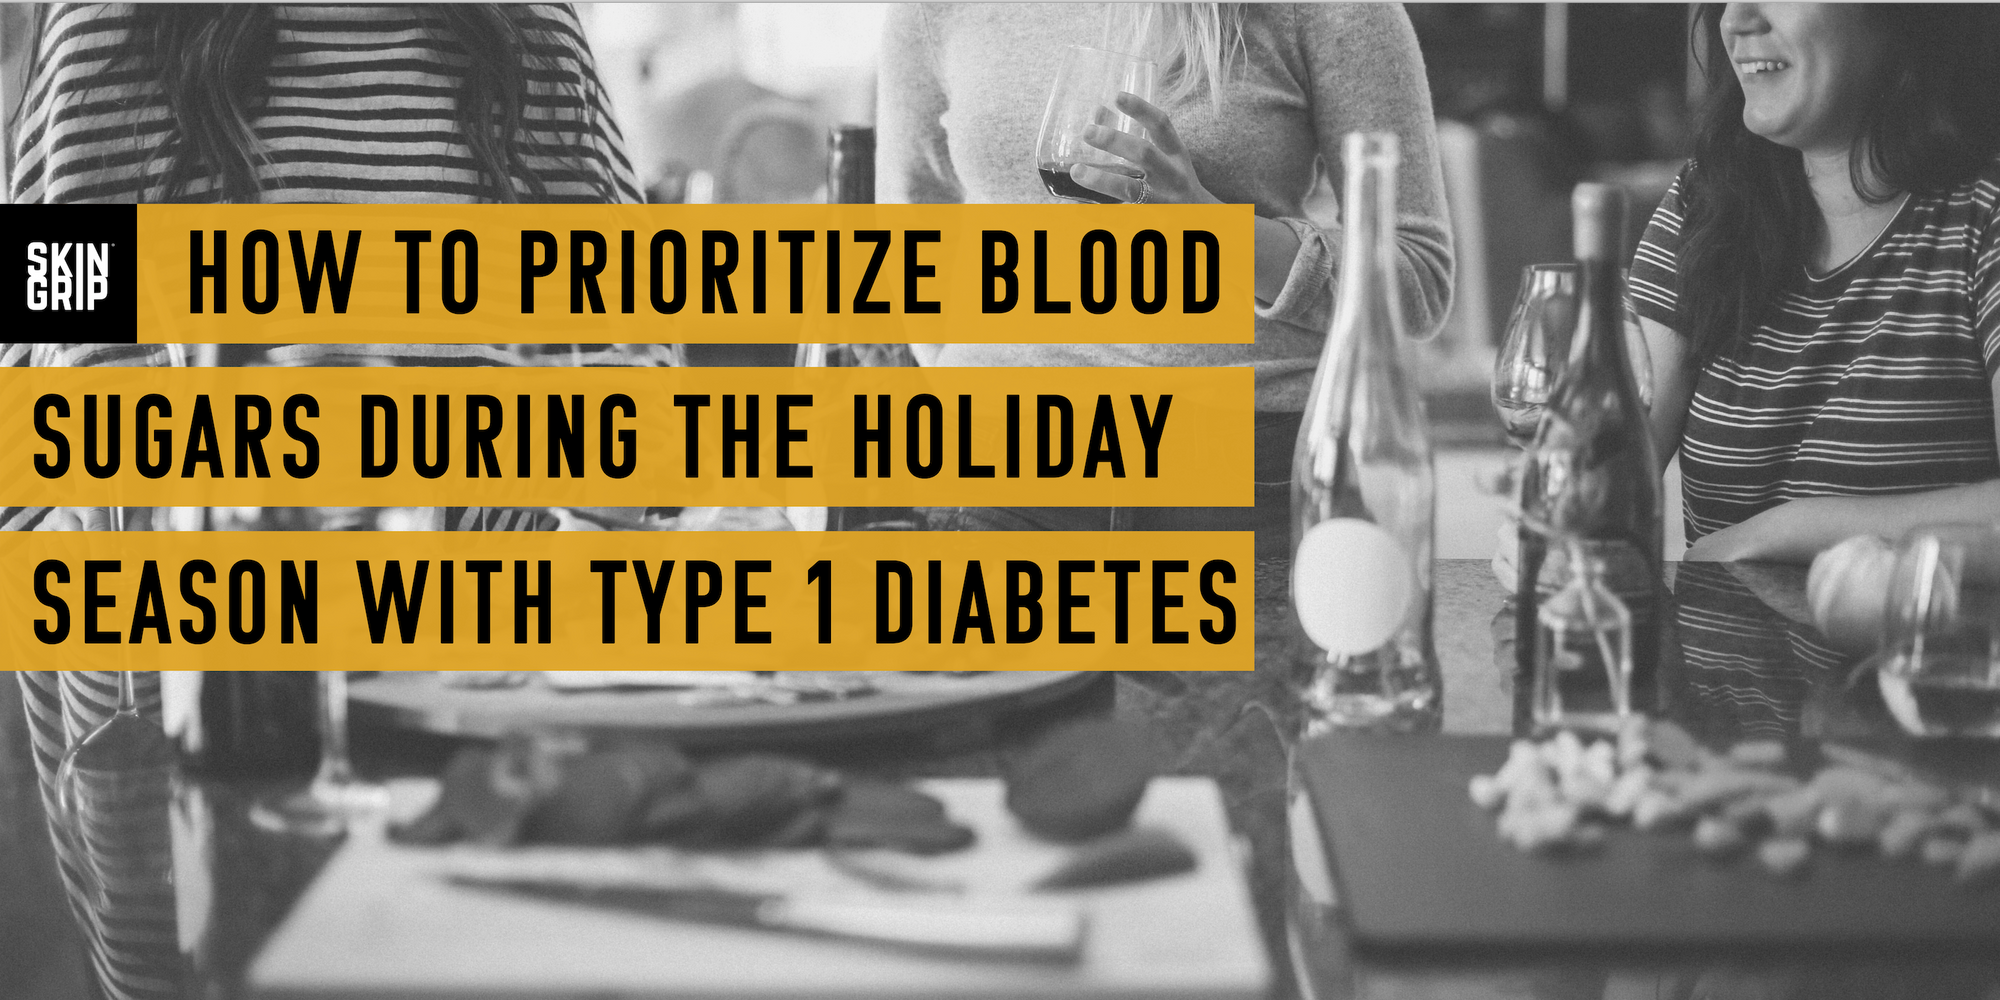 3 Ways to Prioritize Blood Sugars During the Holiday Season with Type 1 Diabetes